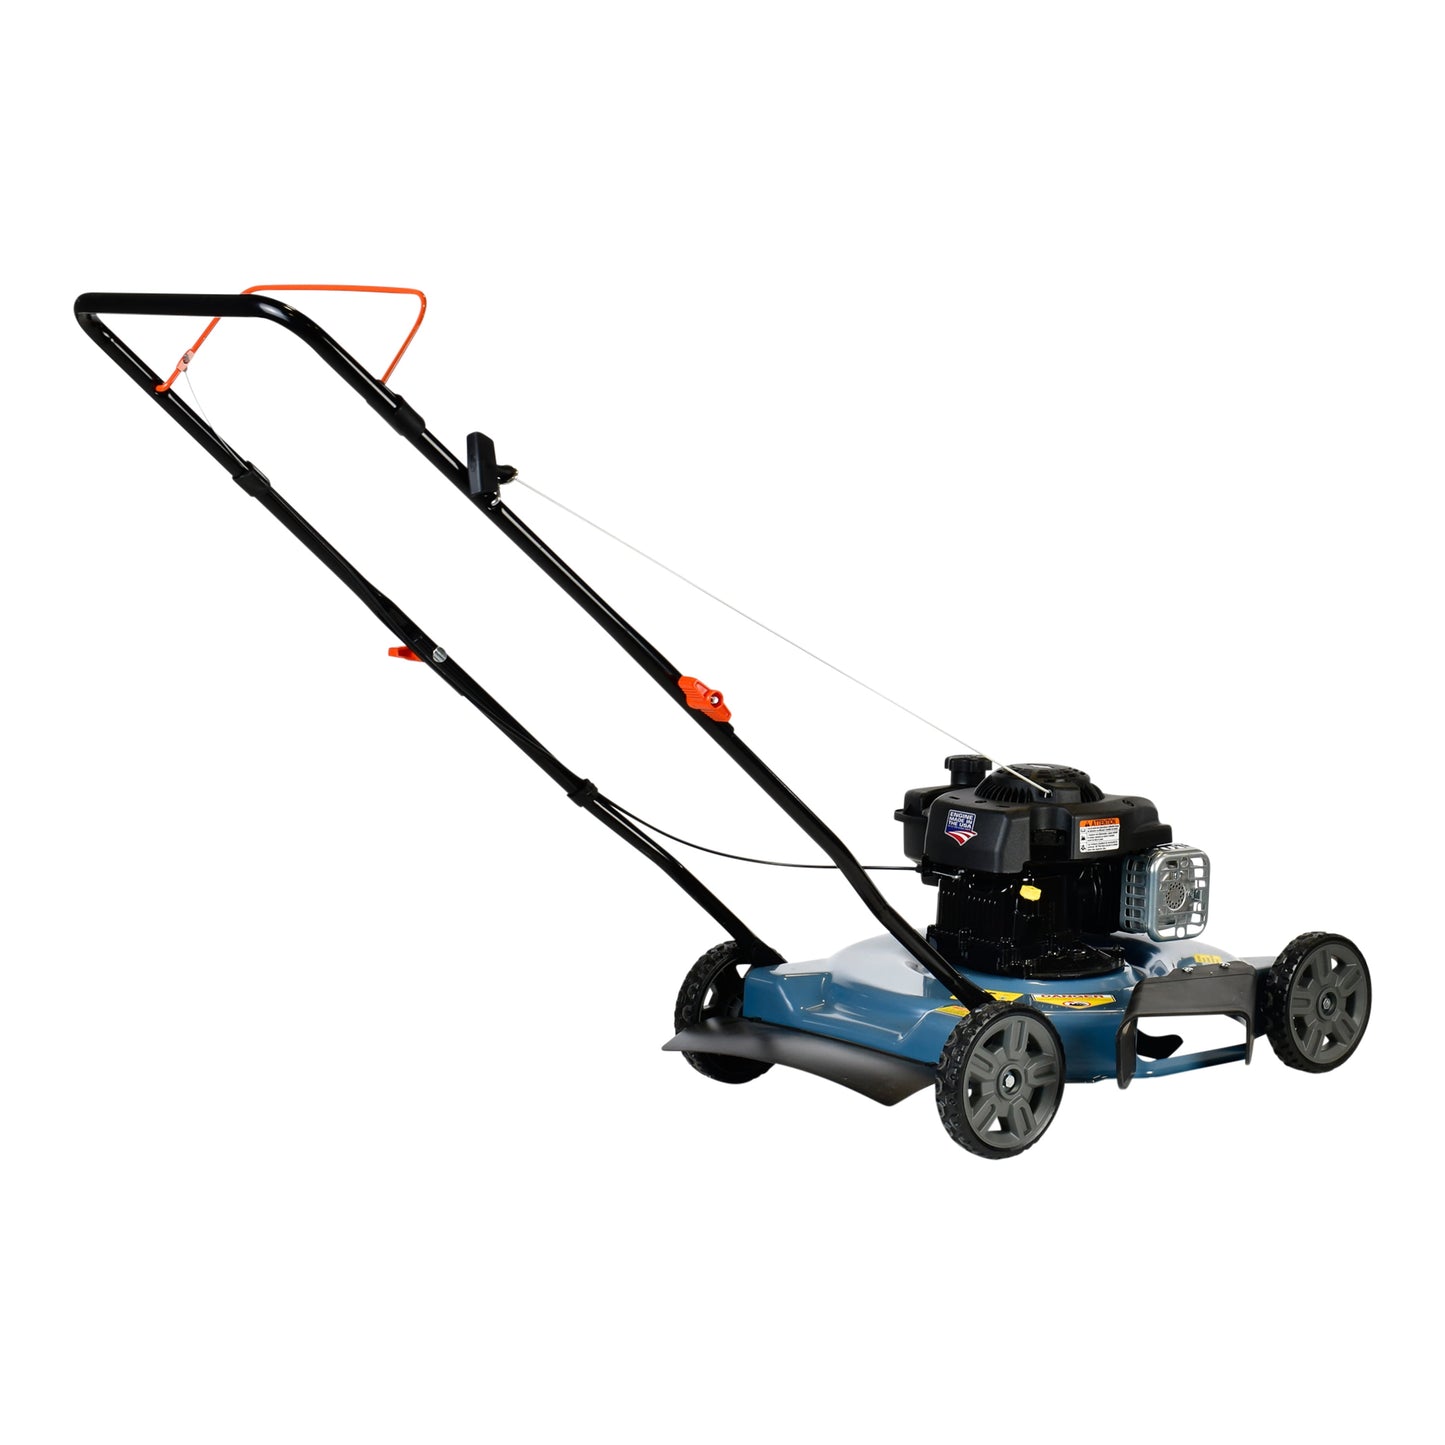 SENIX Gas Lawn Mower, 20-Inch, 125 cc 4-Cycle Briggs & Stratton Engine, Push Lawnmower with Side Discharge, 3-Position Height Adjustment, LSPG-L2, Blue